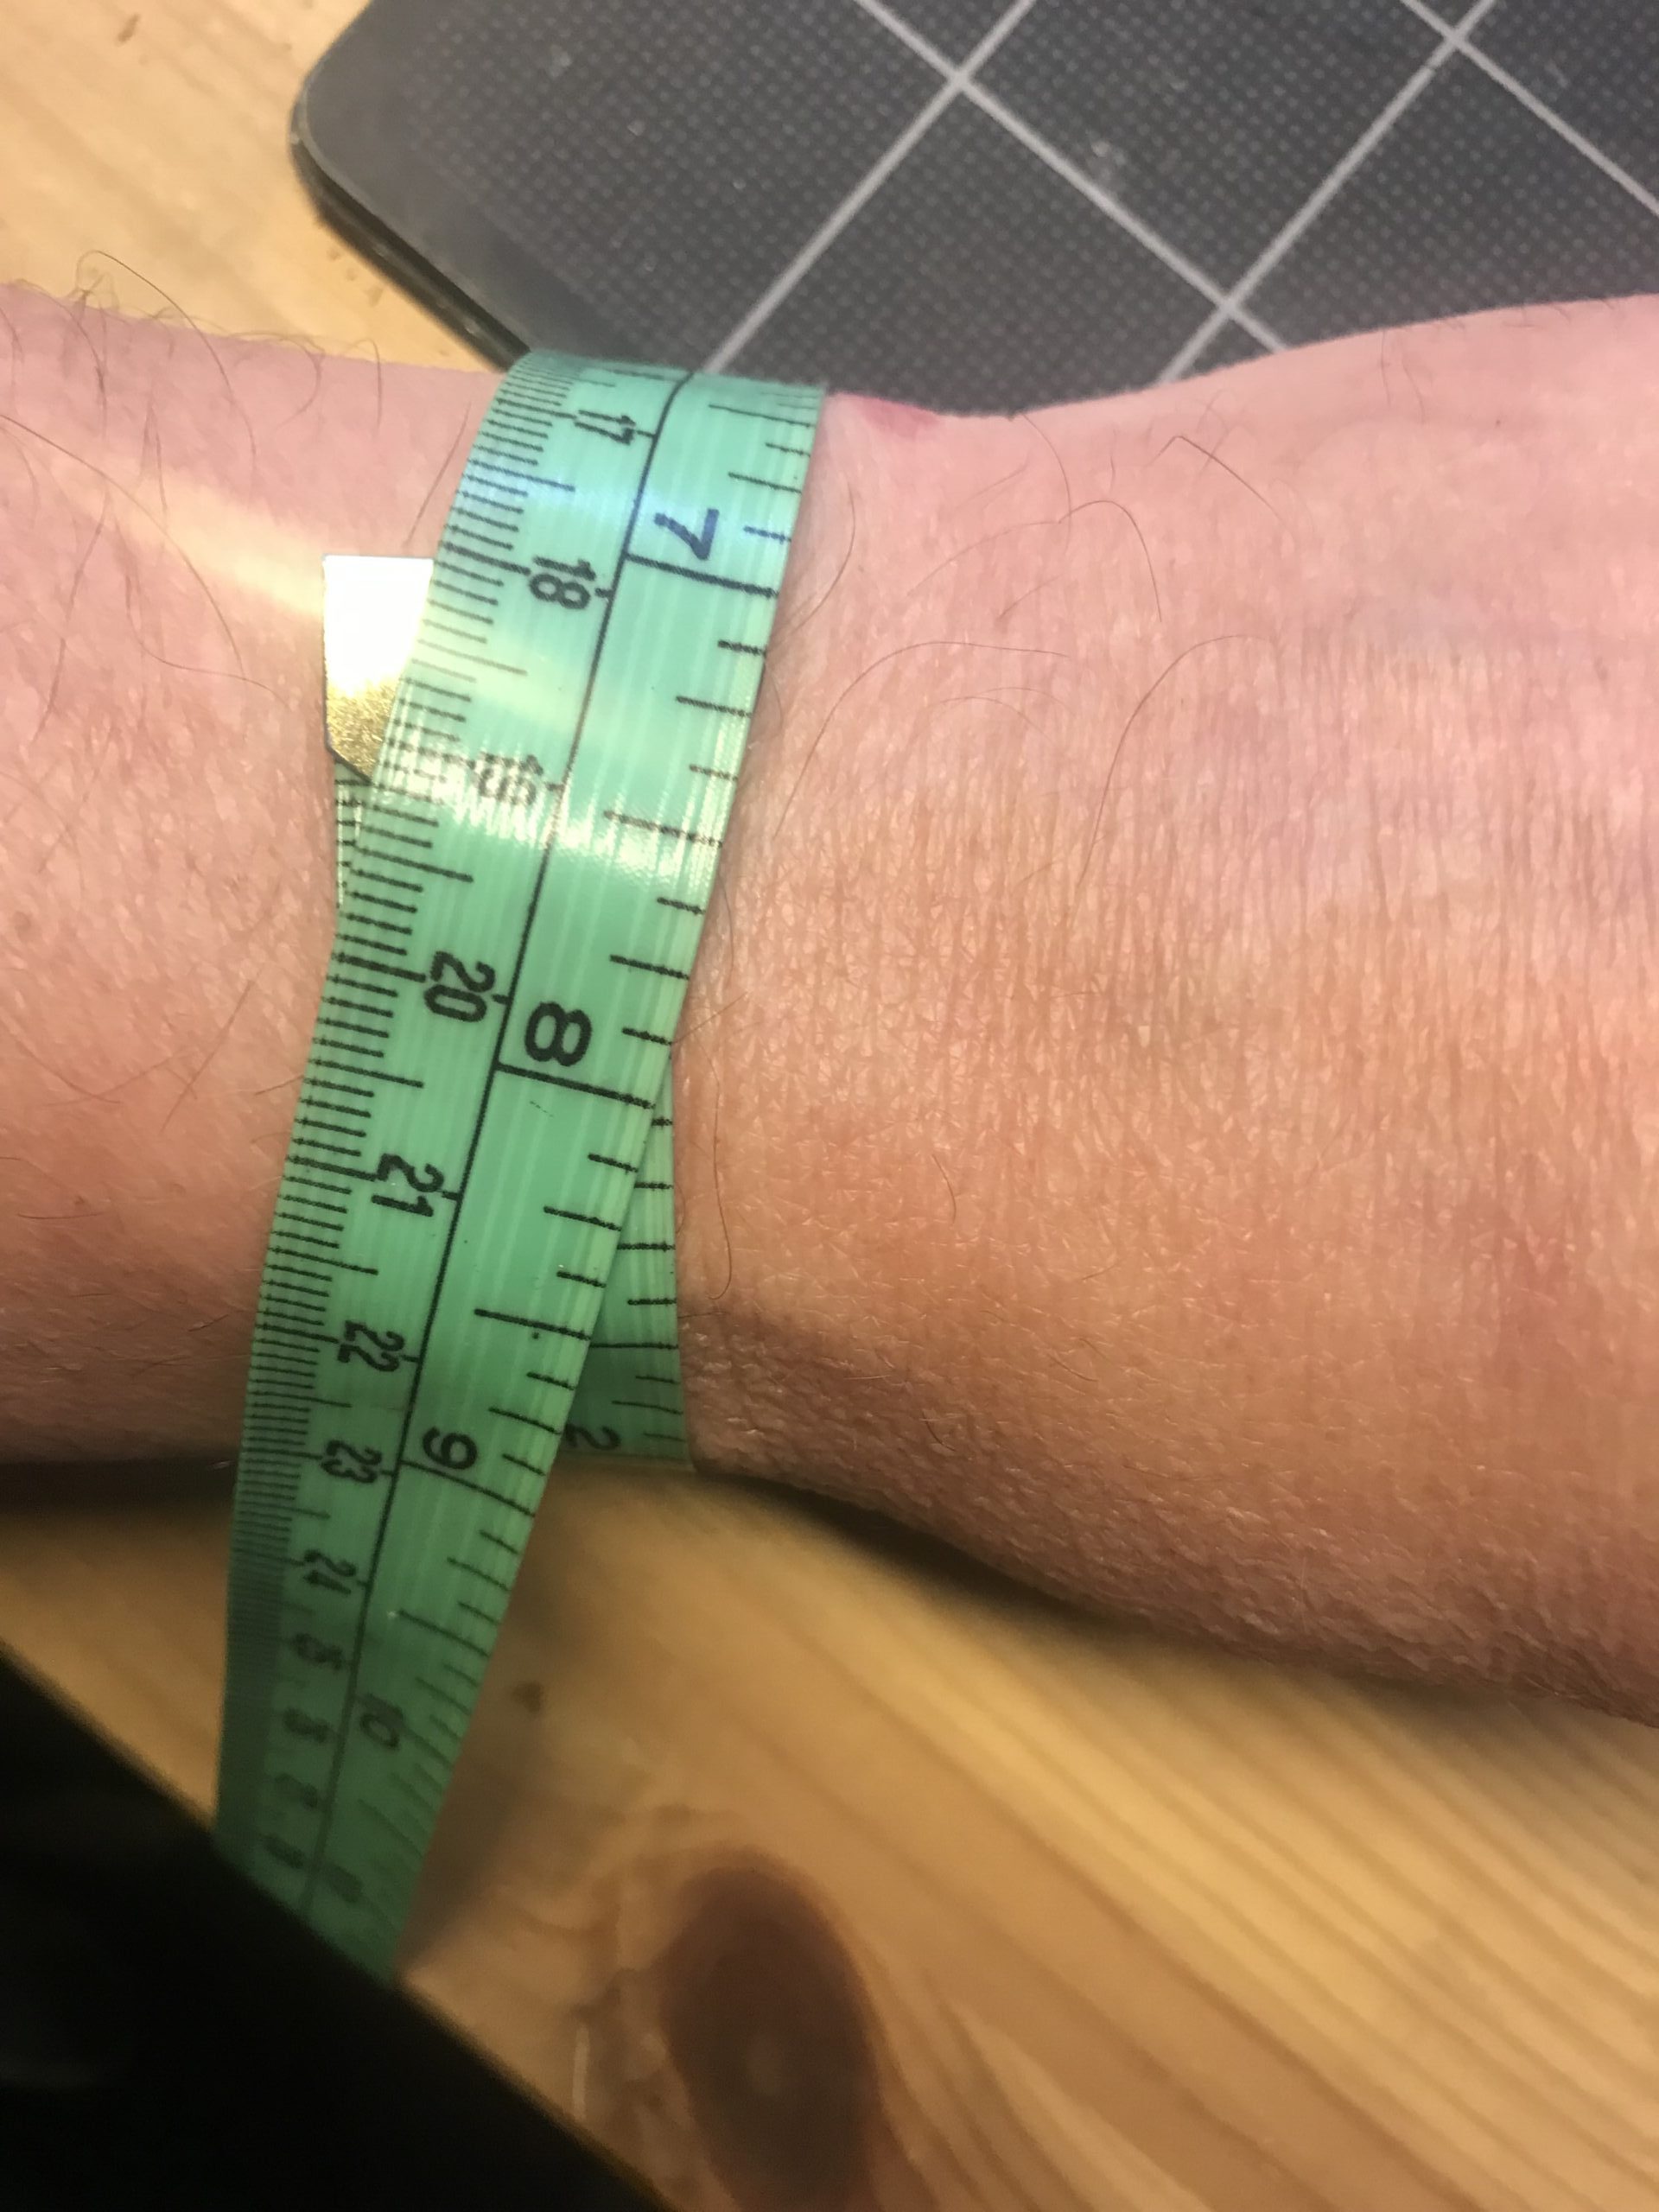 Measure the circumference of your wrist